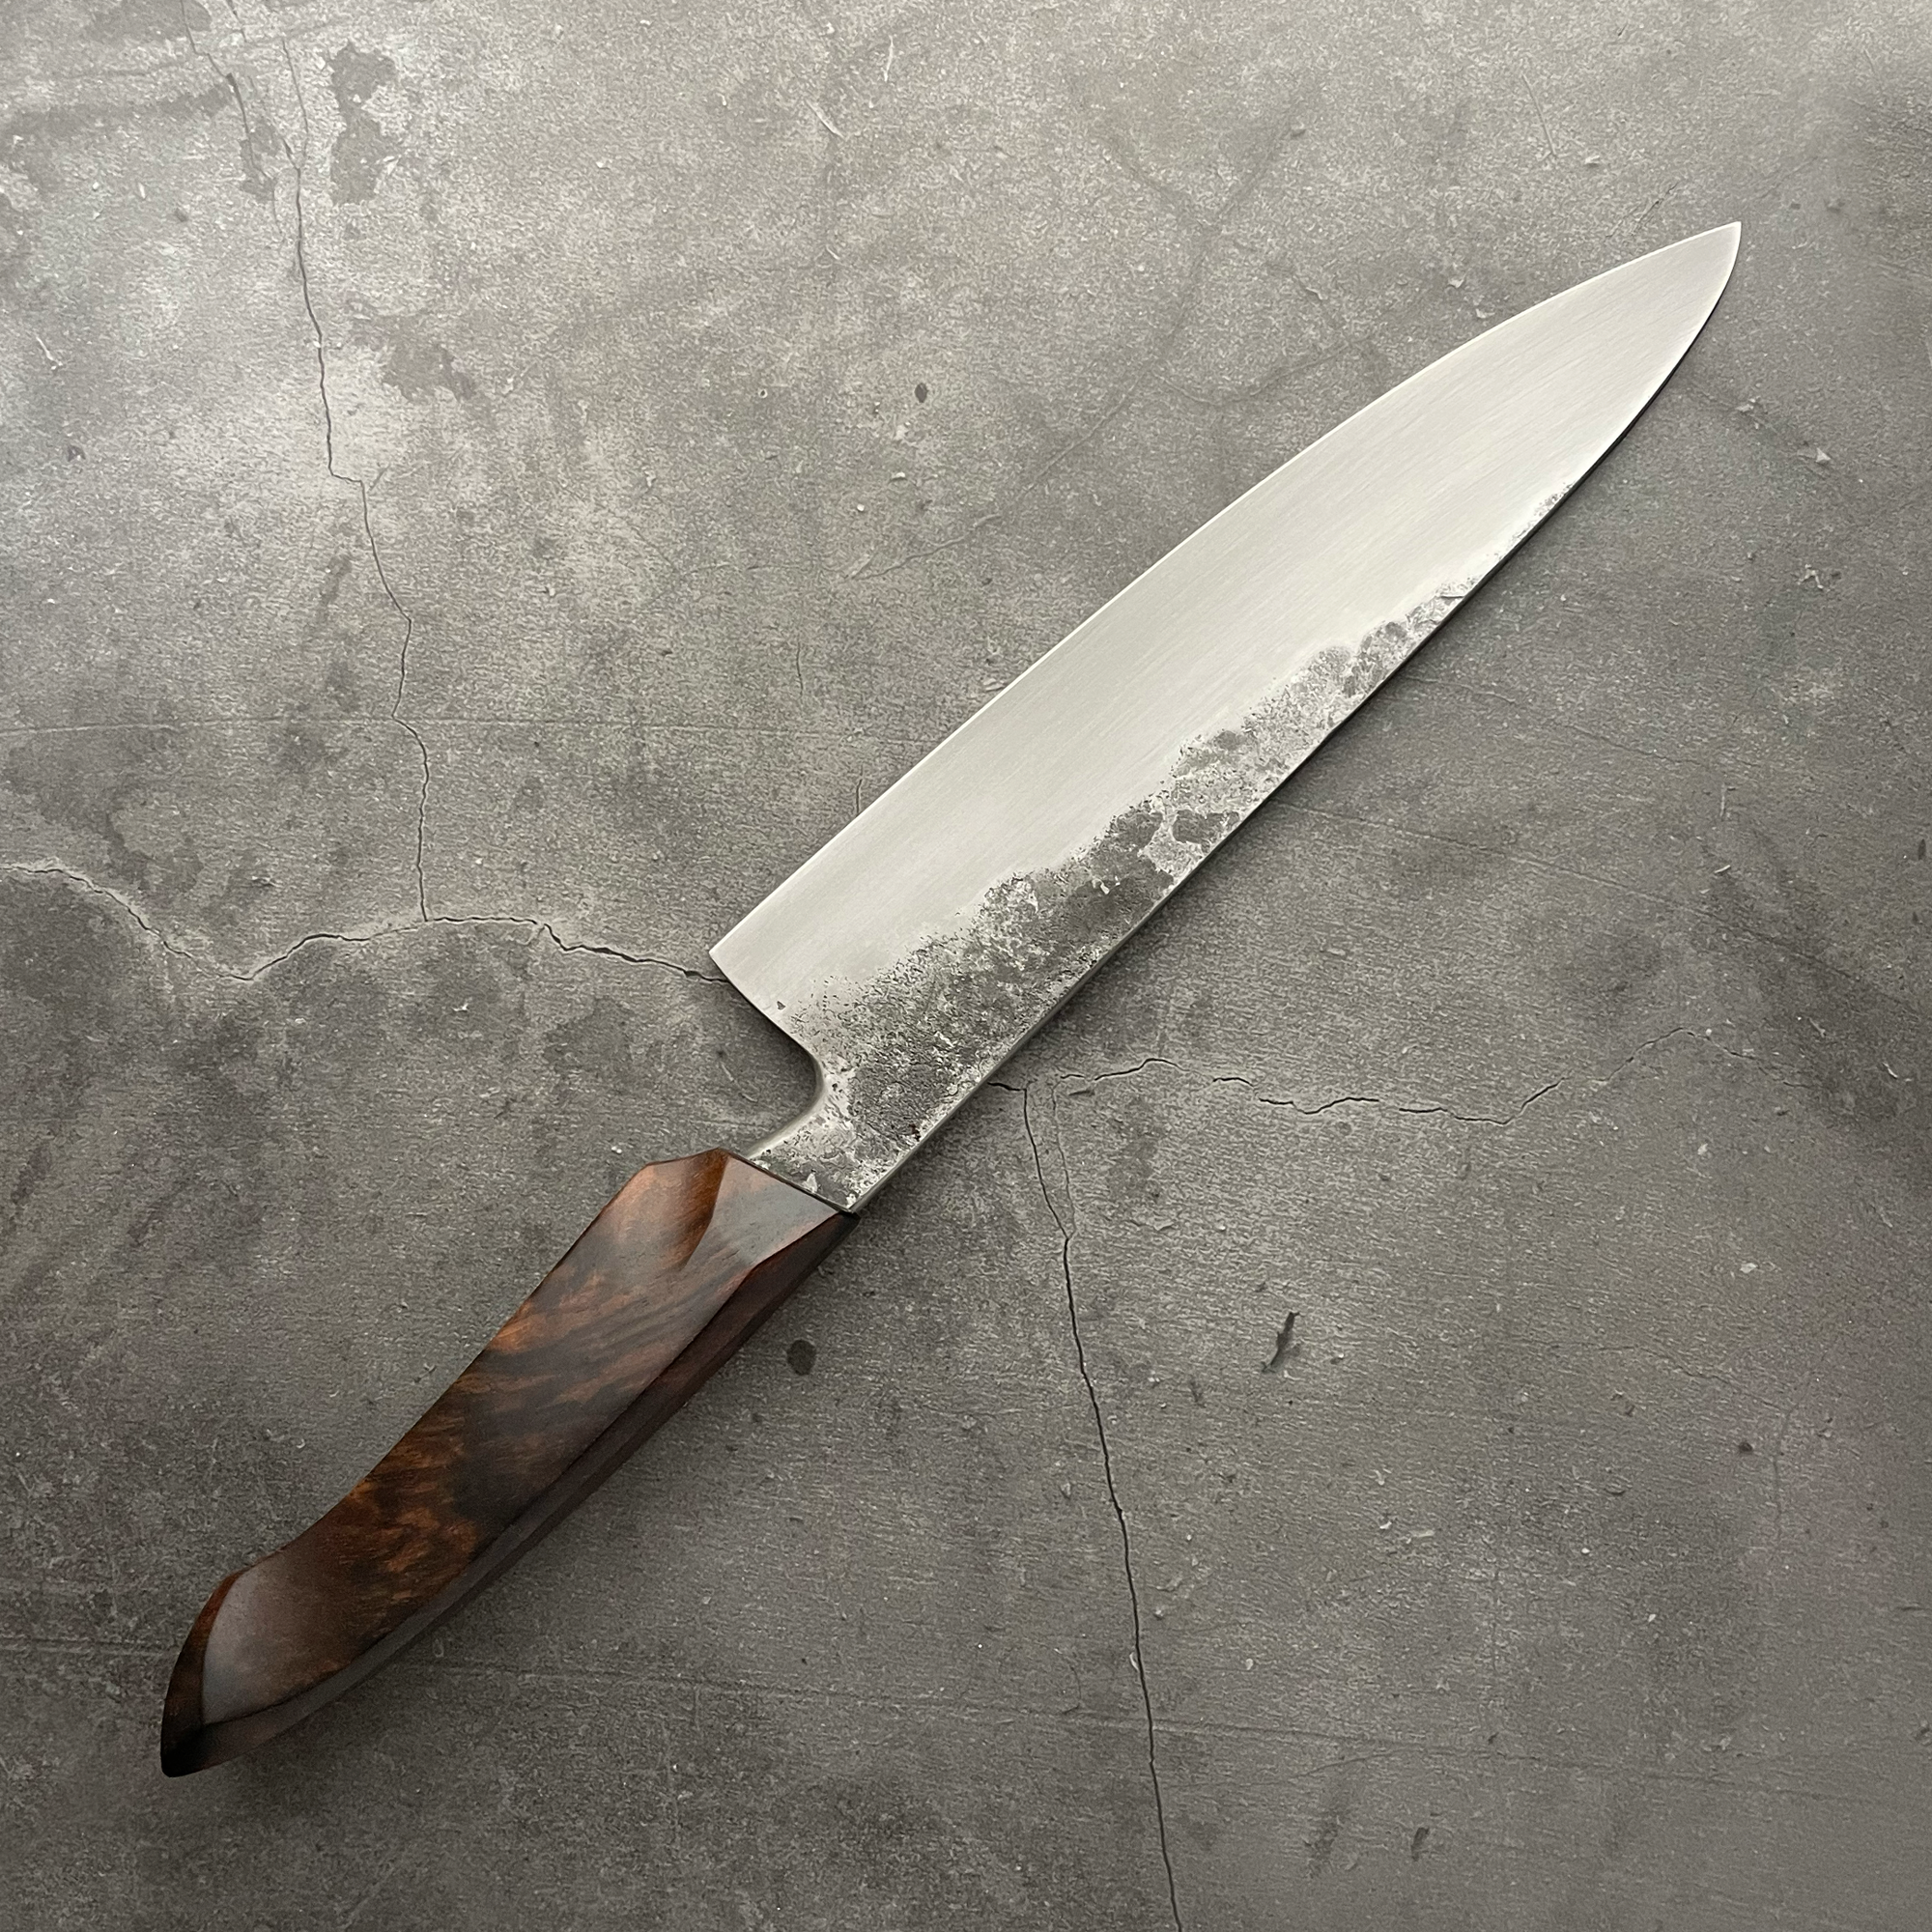 8" CHEF KNIFE